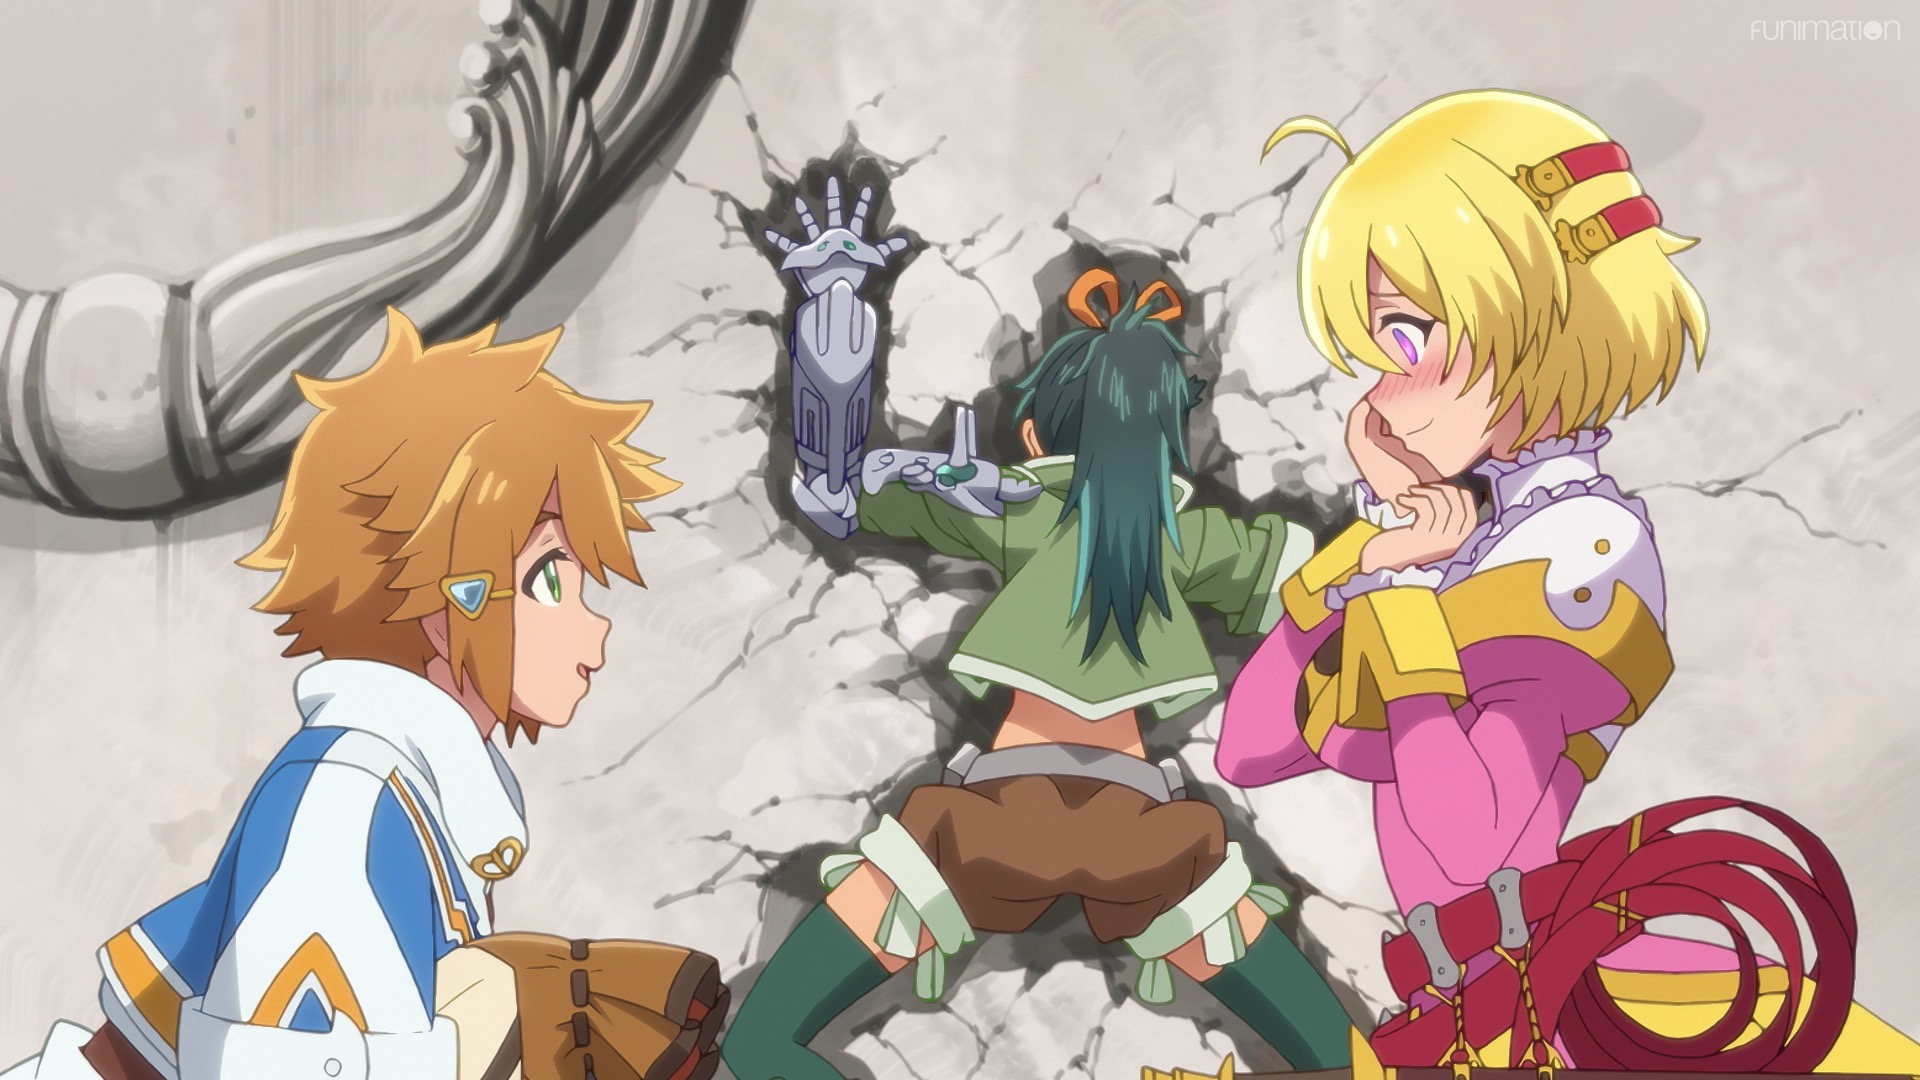 Tatoeba Last Dungeon Episode 2 Discussion & Gallery - Anime